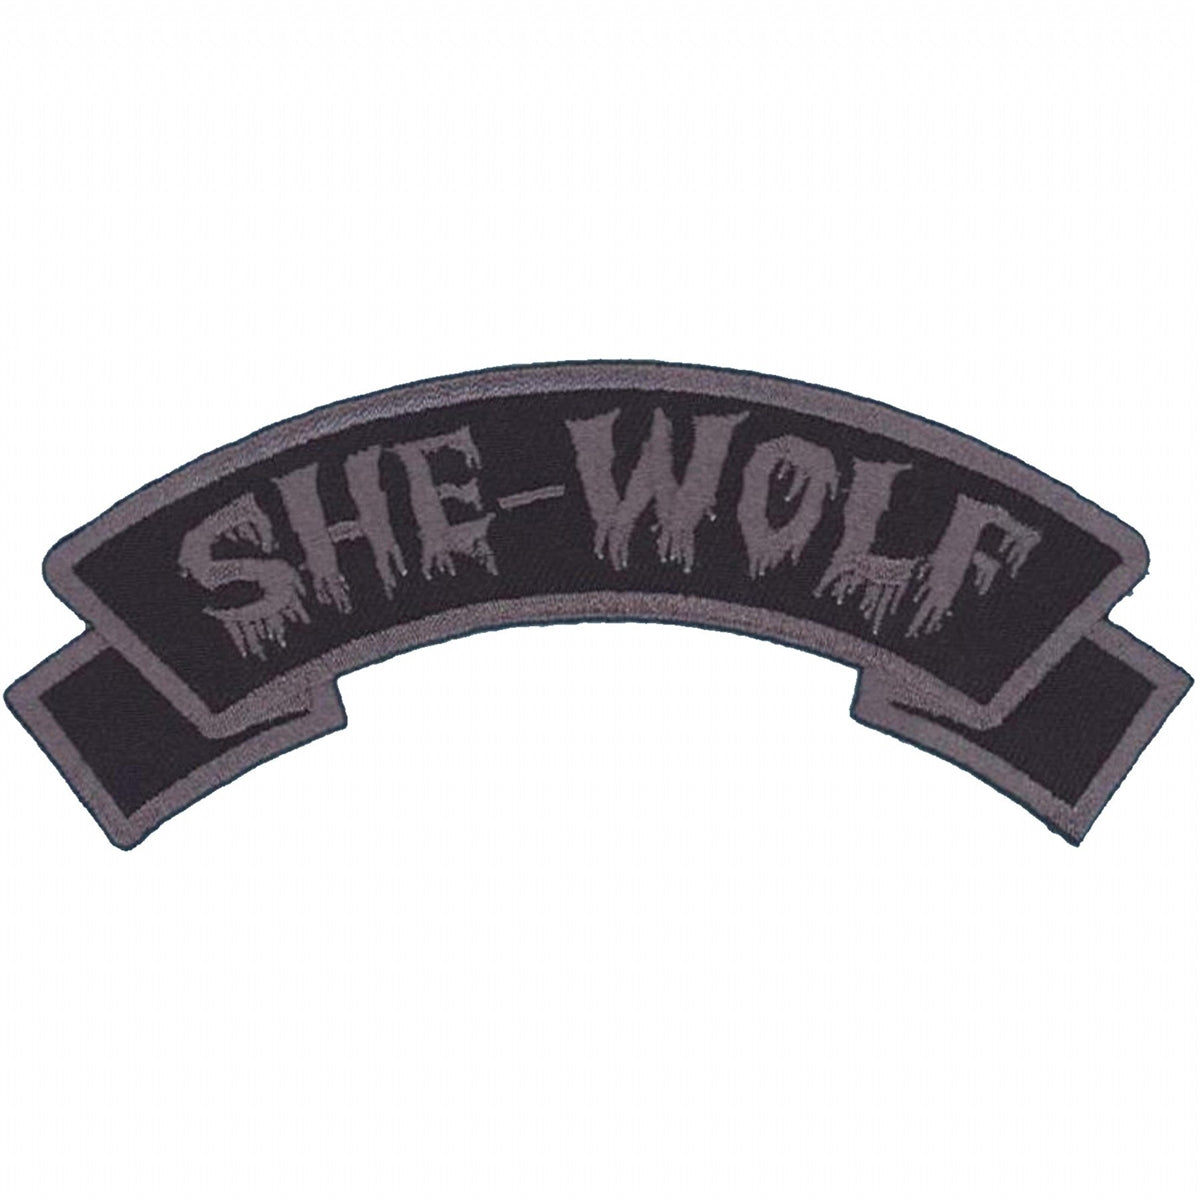 black 5" arched banner patch grey embroidered outline "She-Wolf" text